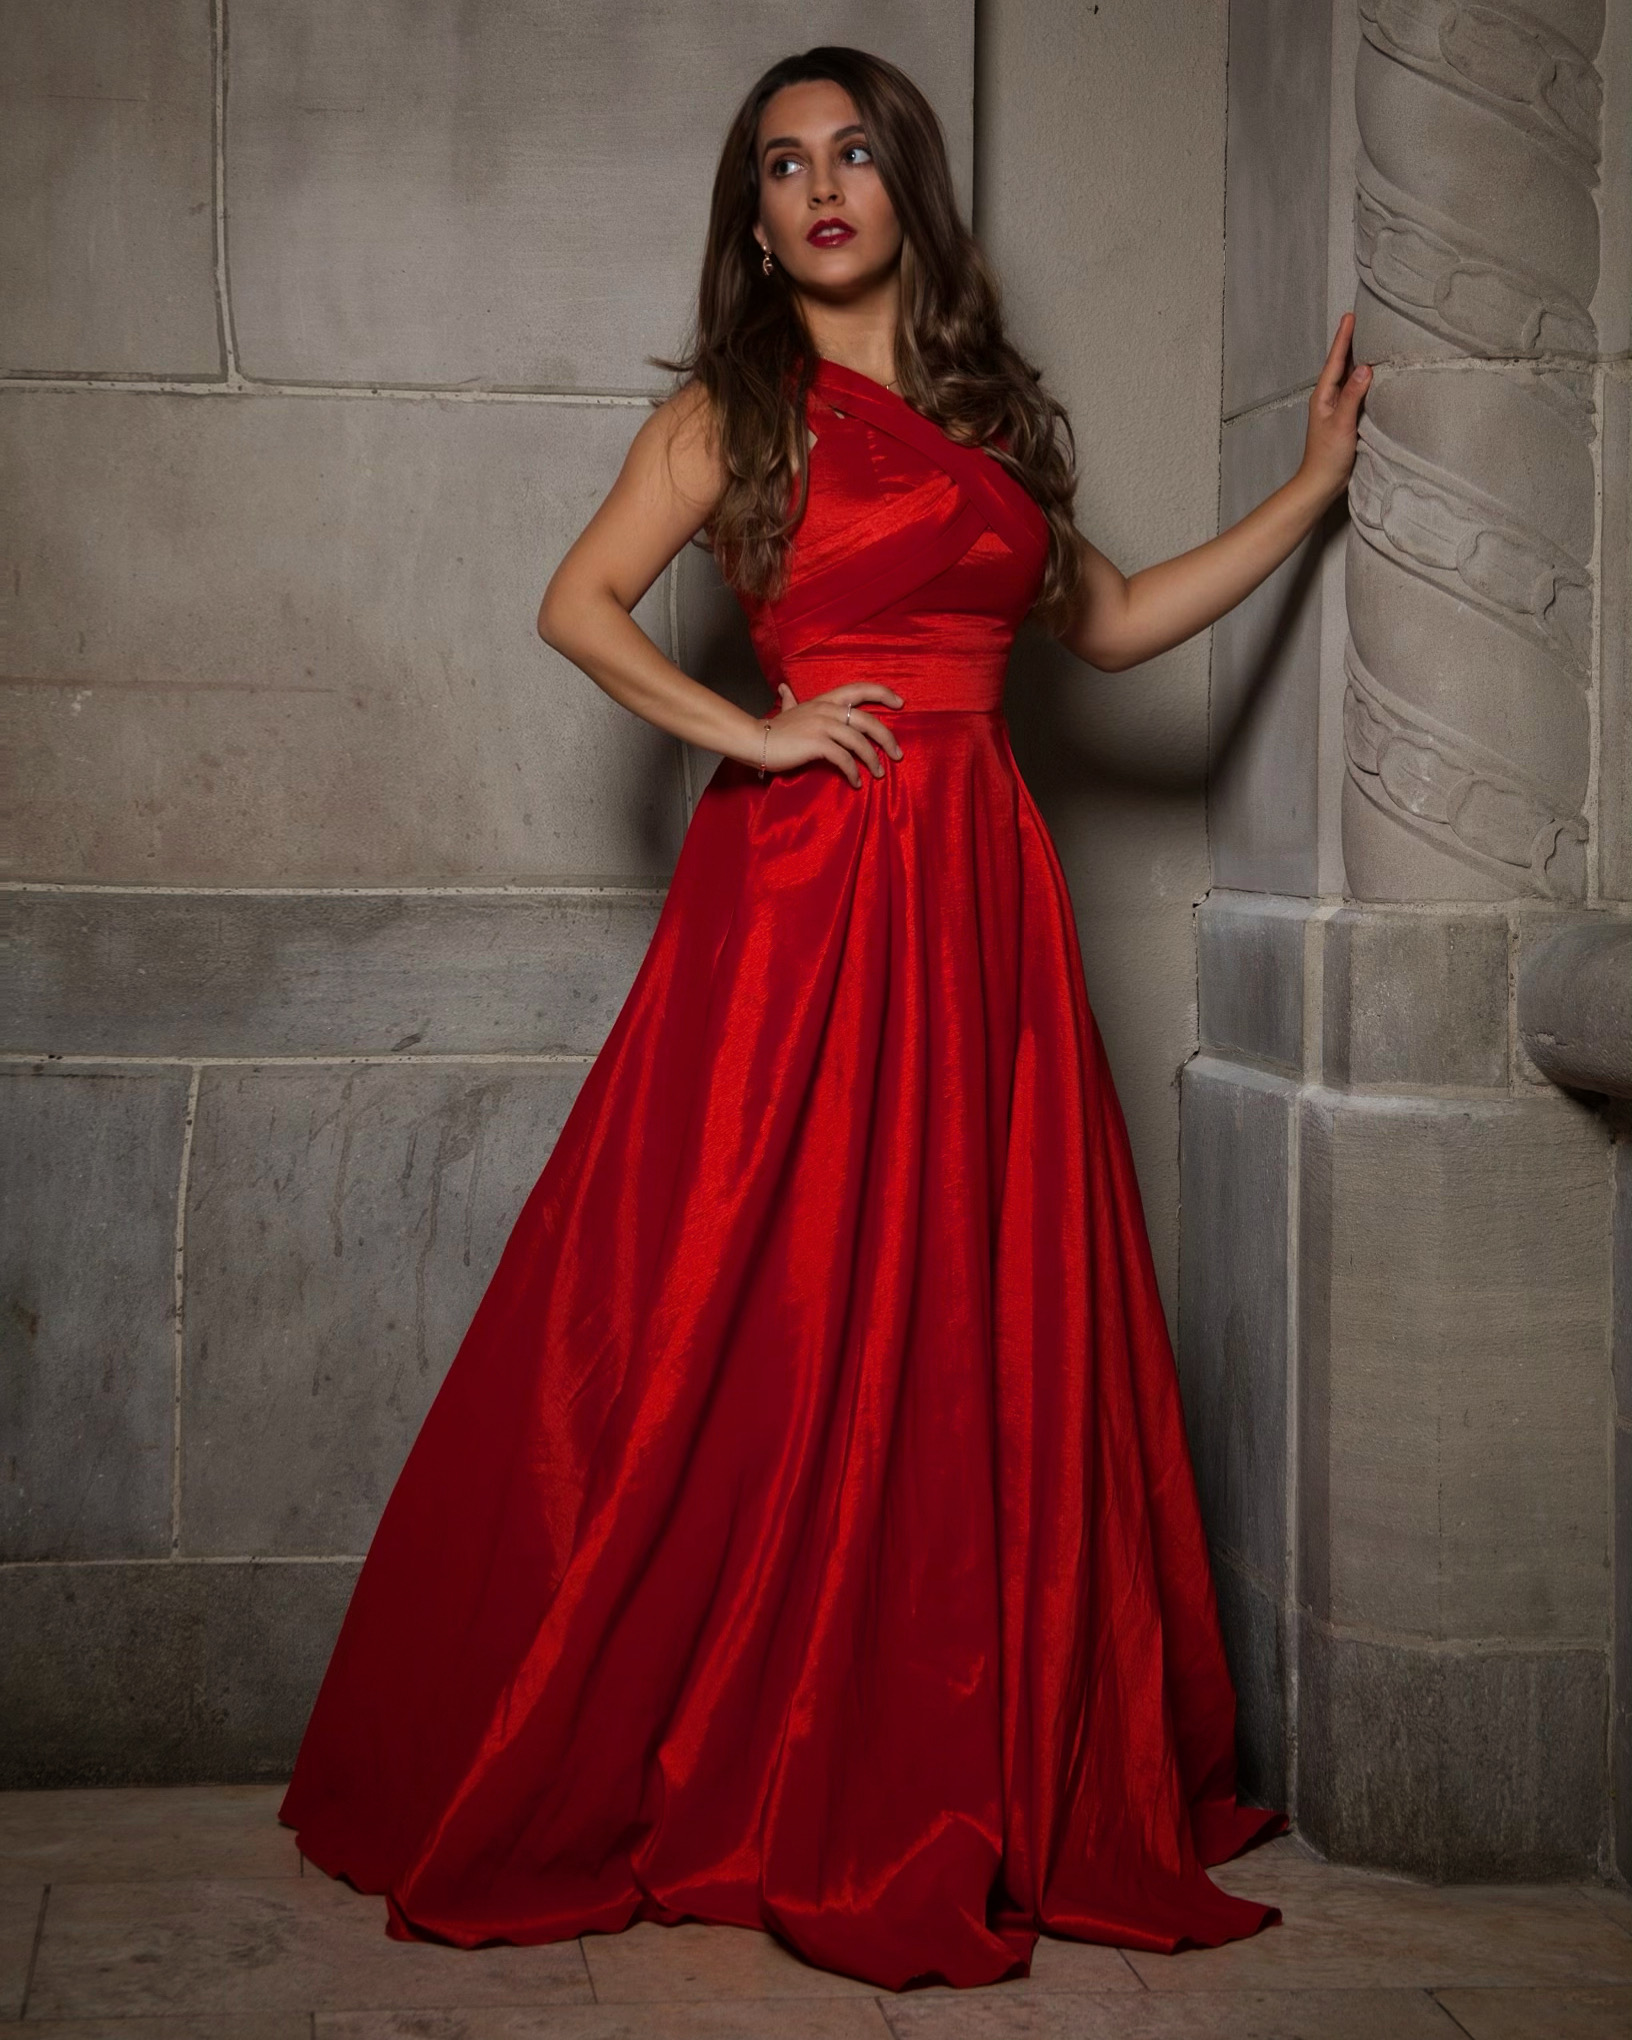 Darya Zonoozi in her red gown Downtown Toronto